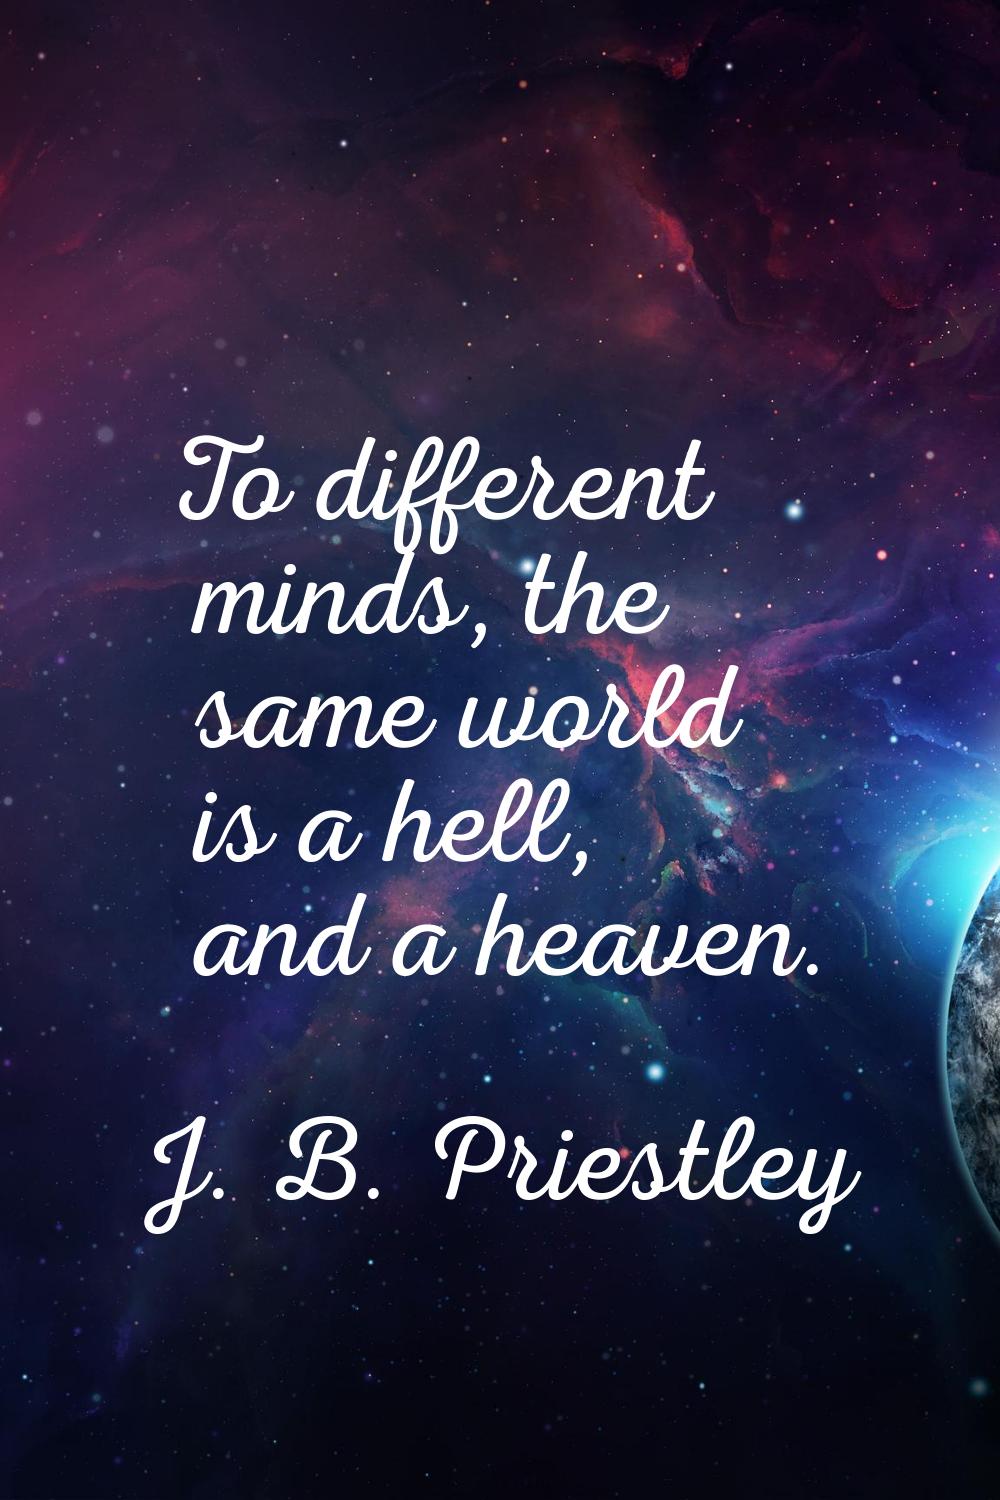 To different minds, the same world is a hell, and a heaven.